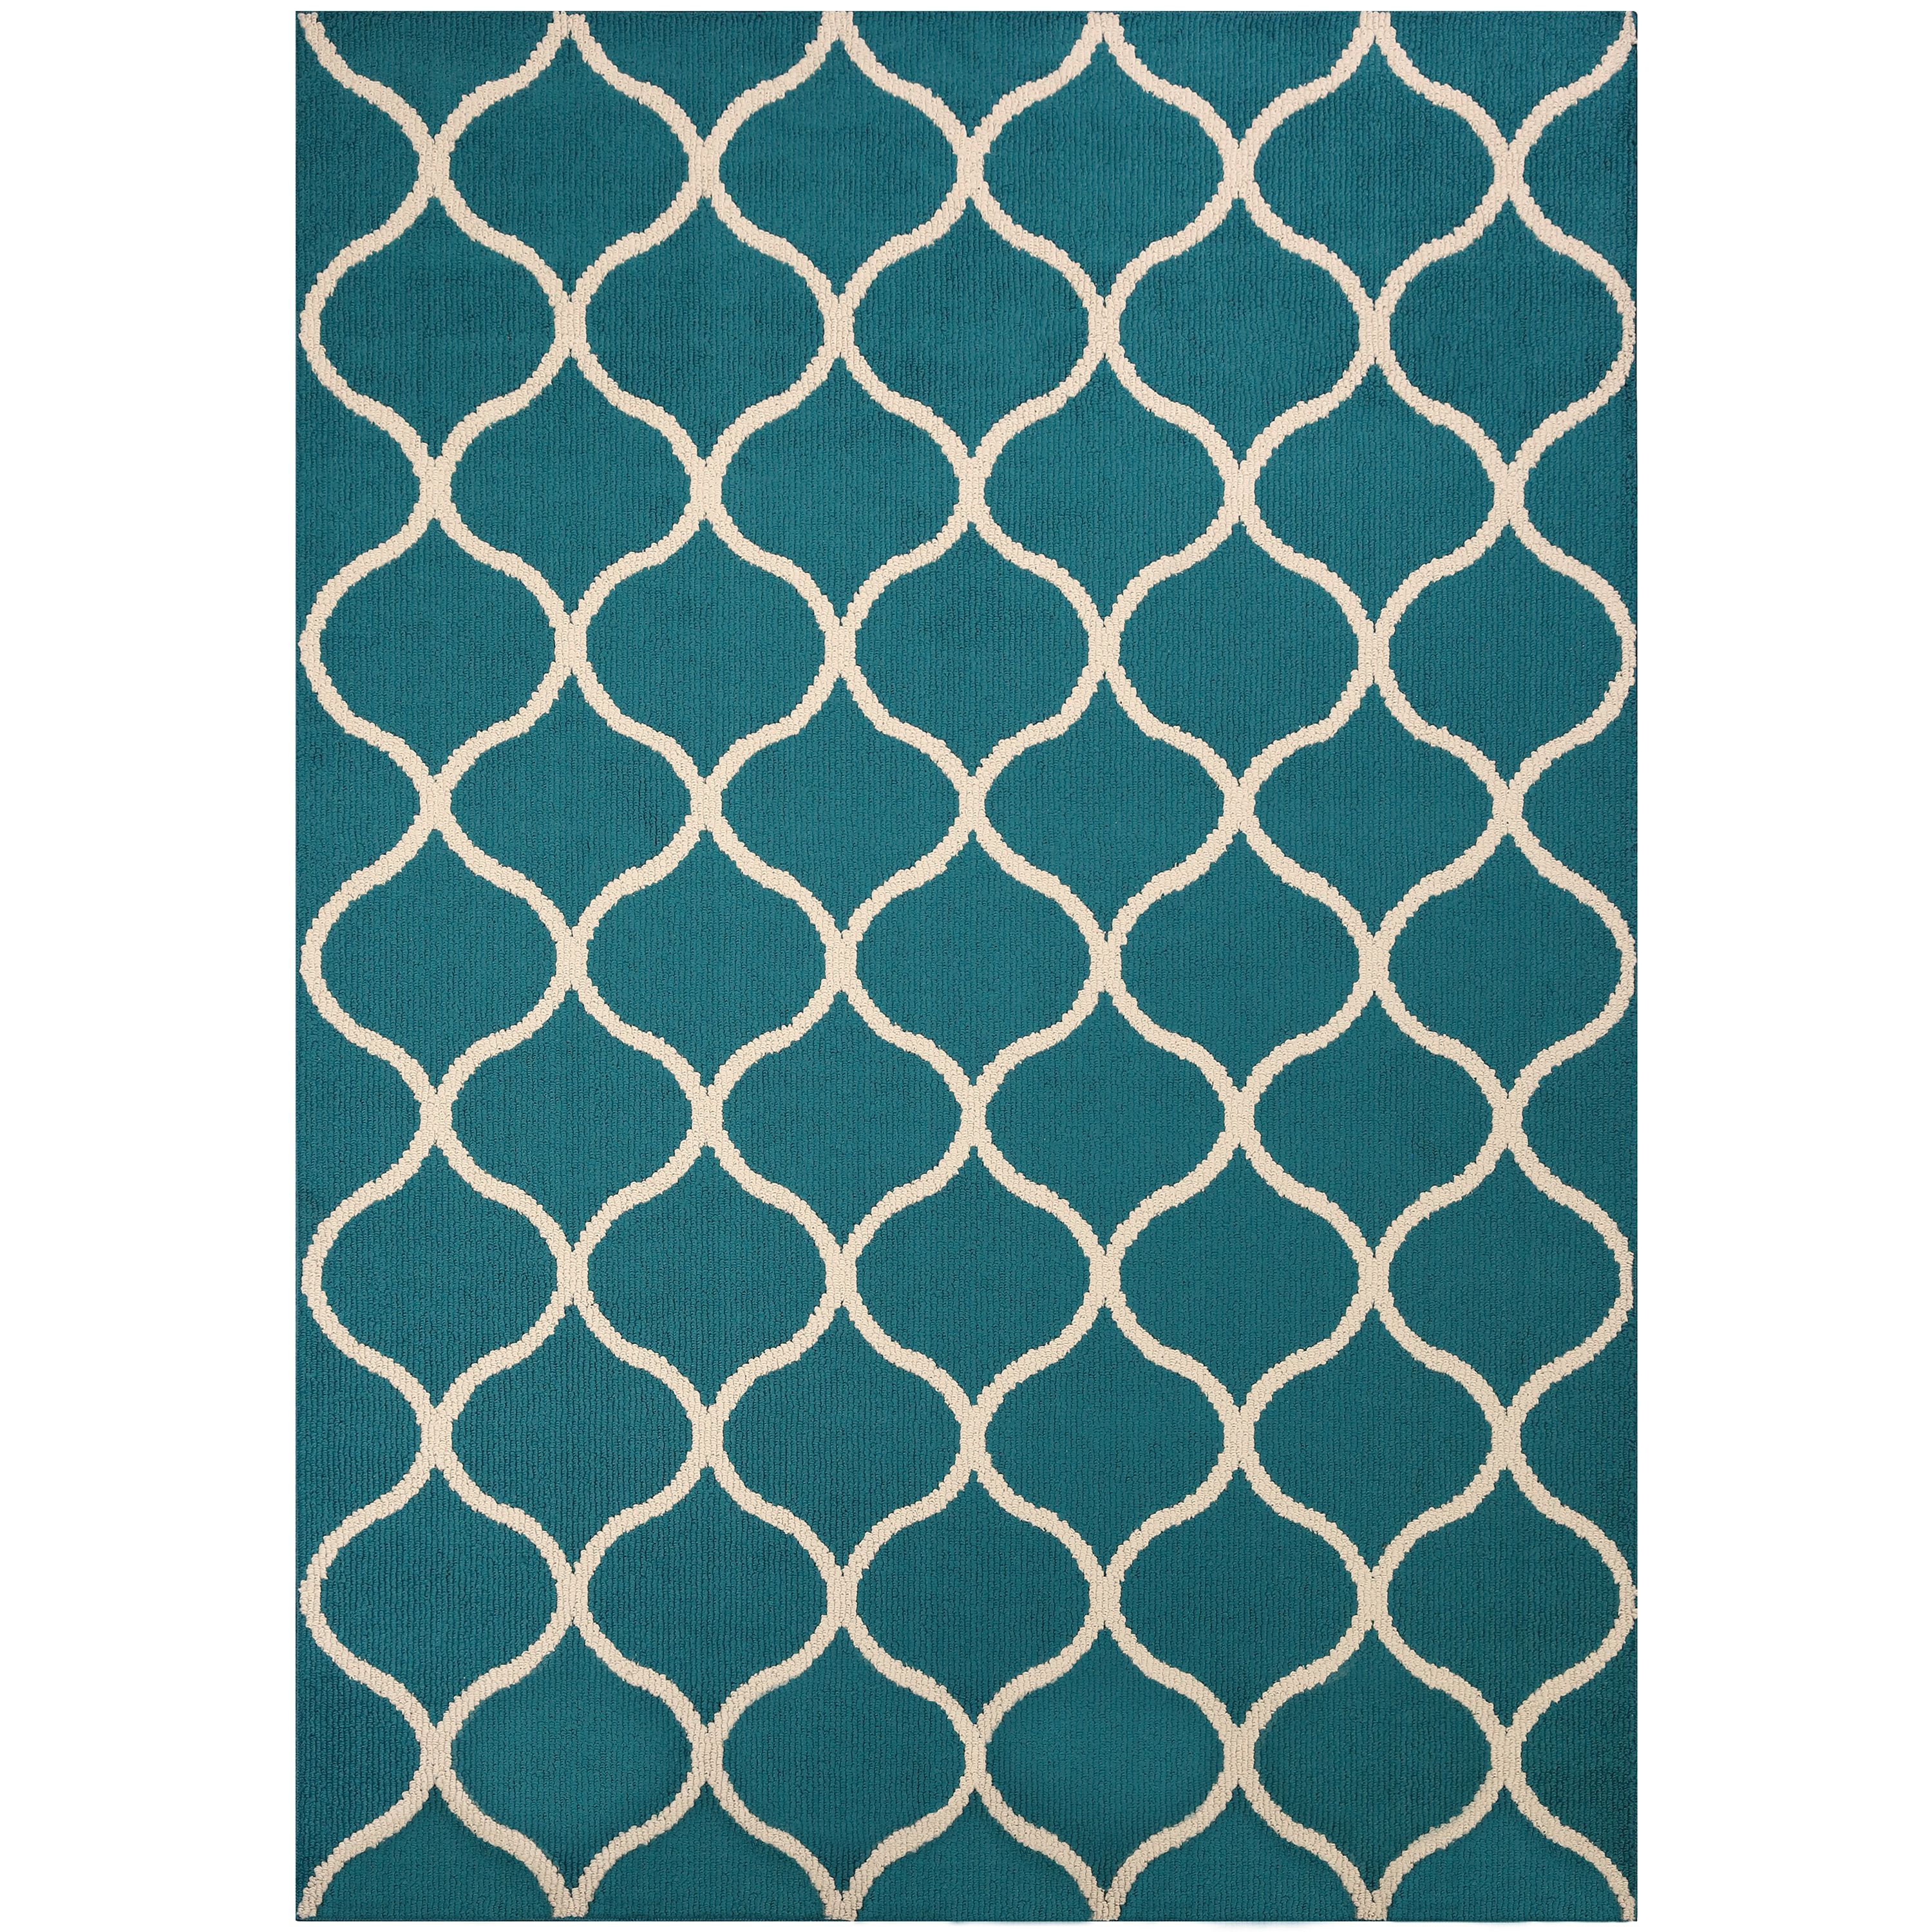 Maples Rugs Transitional Fretwork Teal Blue Living Room Indoor Area Rug, 5' x 7' - image 1 of 6